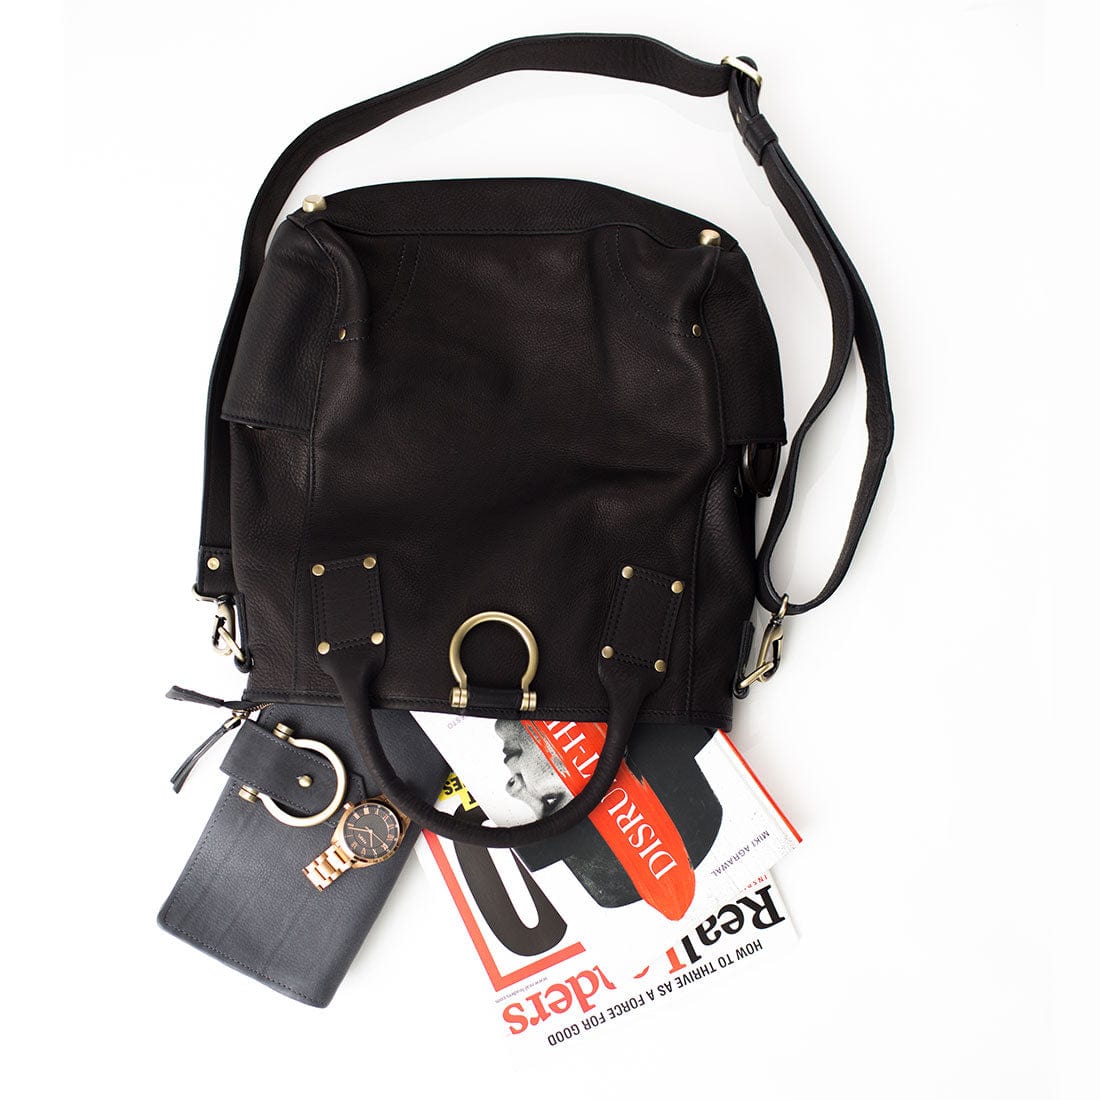 Black Chloe leather crossbody backpack bag fits your everyday essentials.